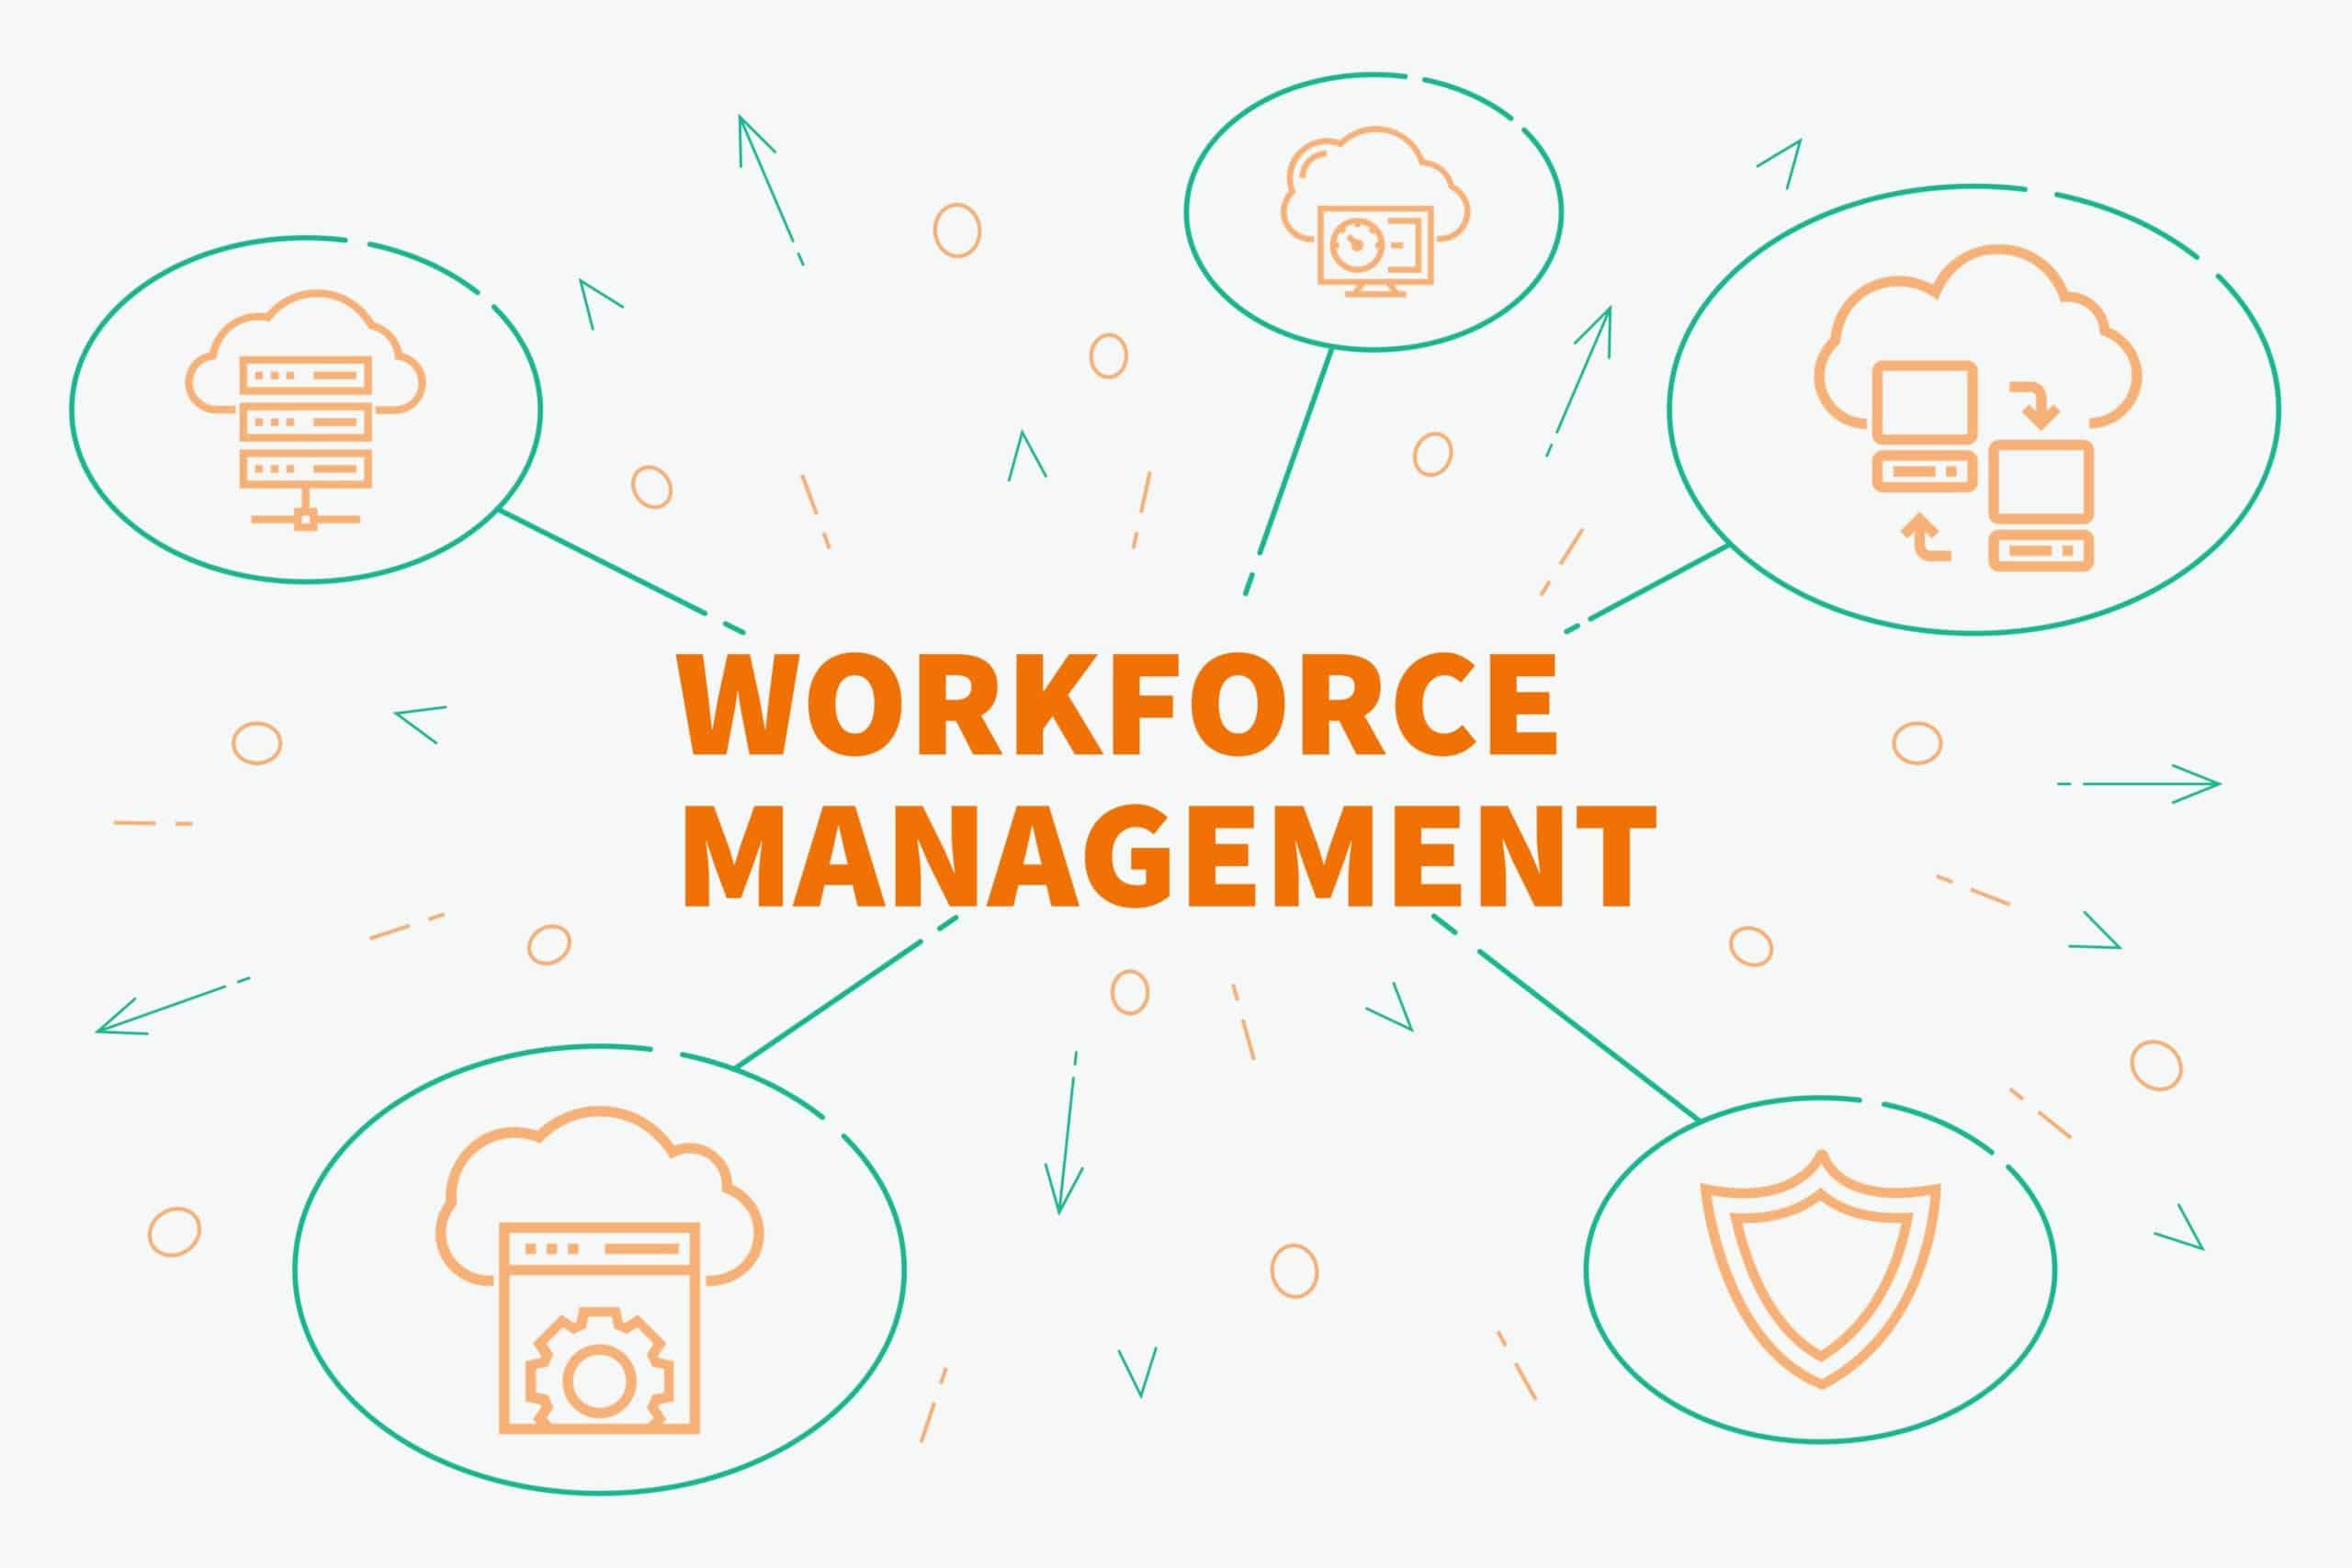 20 Benefits of Using A Workforce Management Software